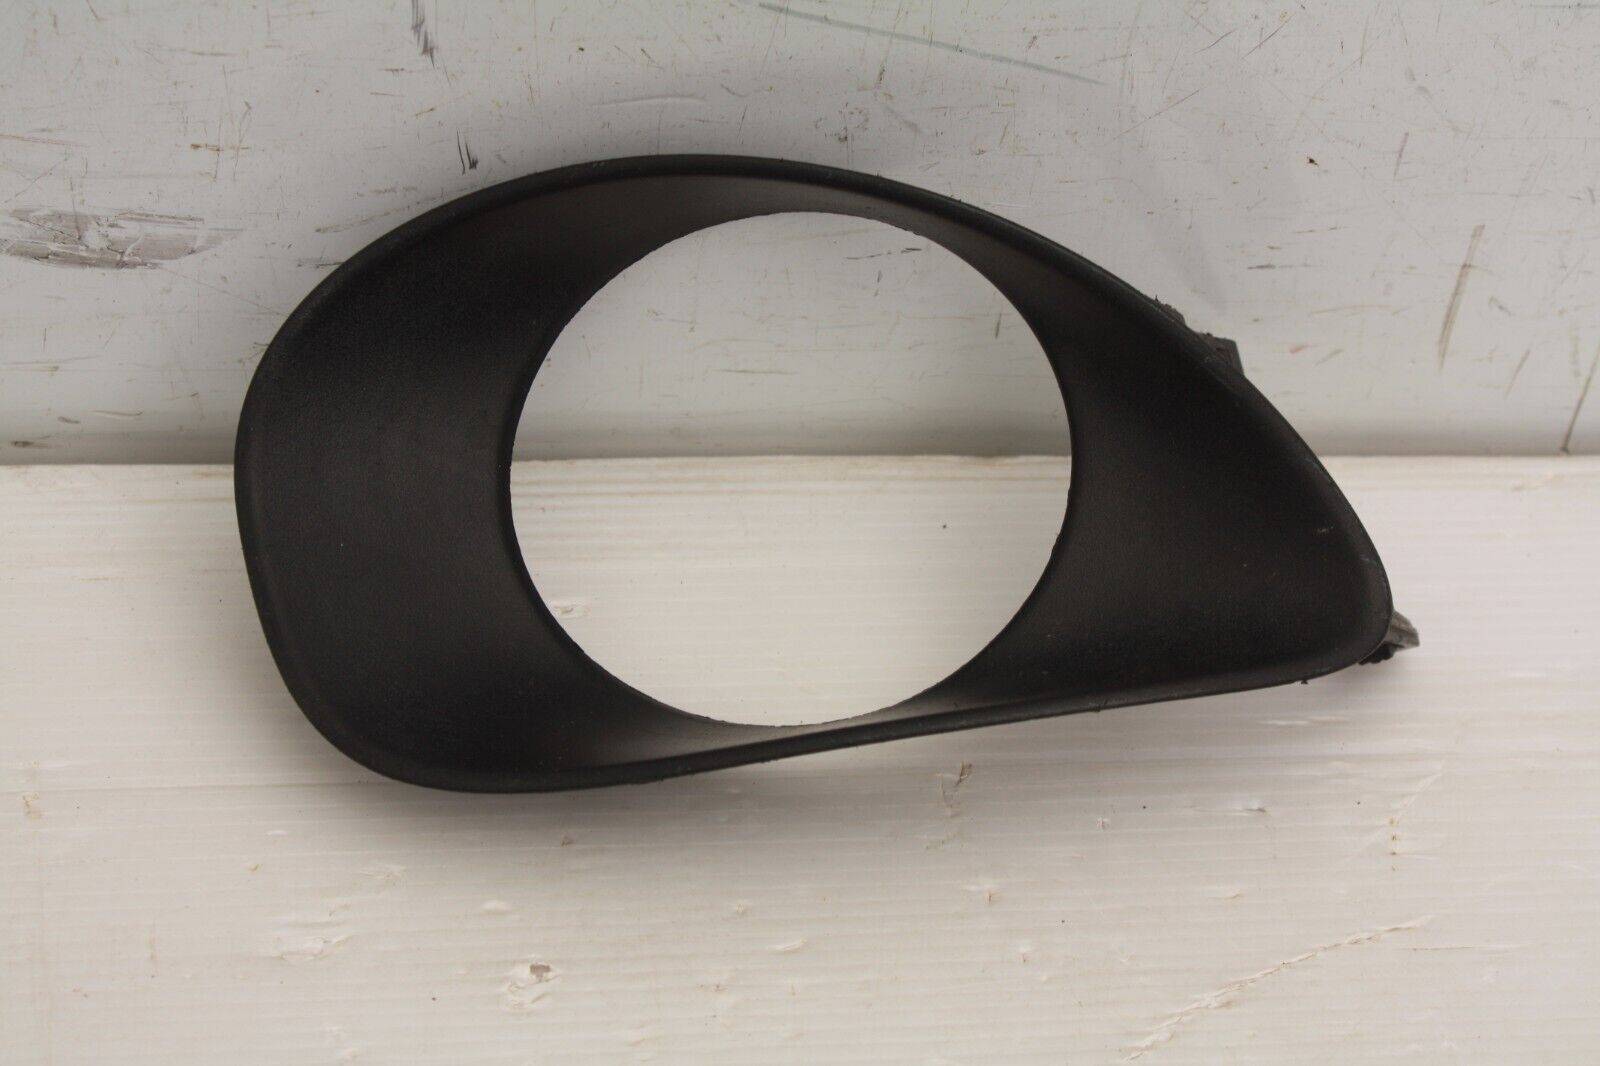 Toyota Yaris Front Bumper Right Fog Light Cover 2006 to 2009 81481 0D020 Genuine 175816214168